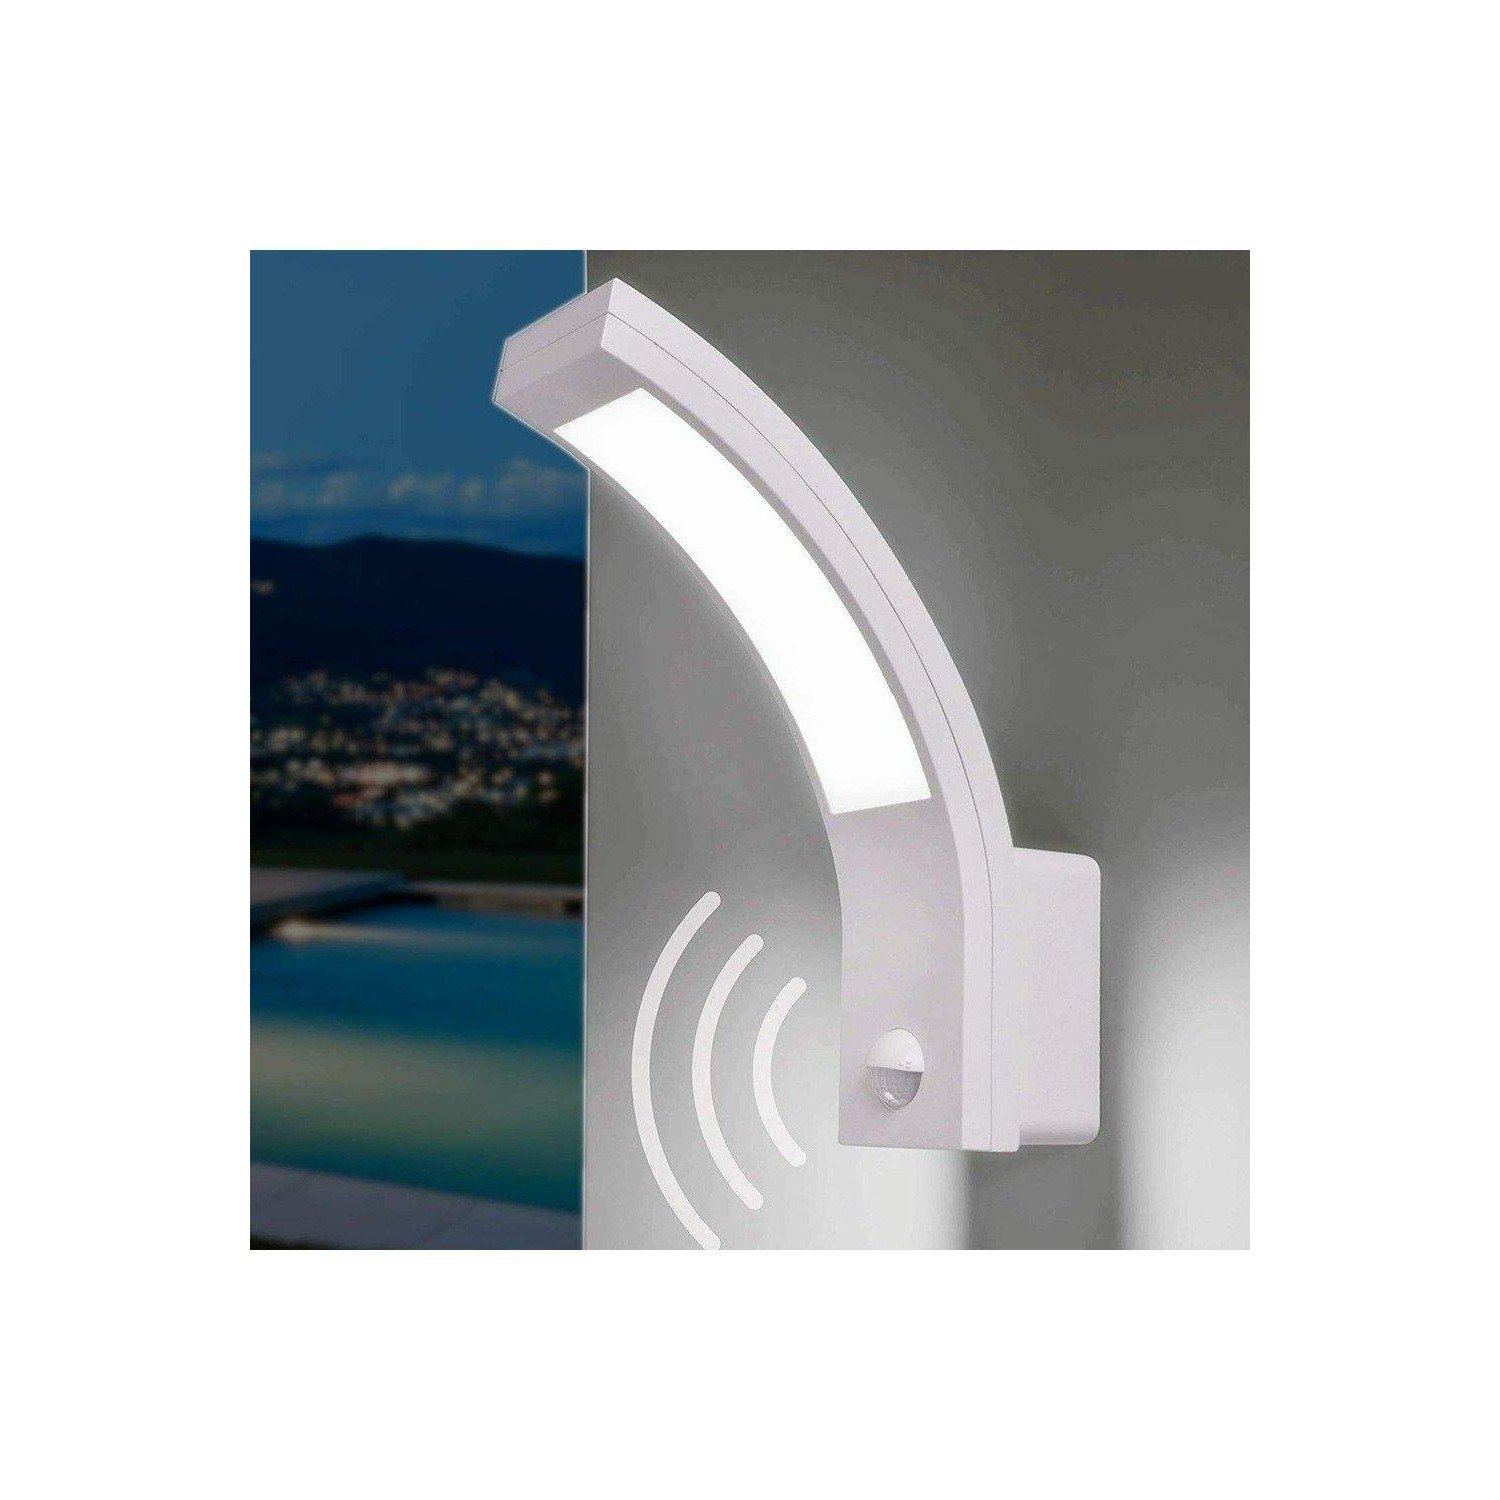 'Paris' White LED Curved Outdoor Wall Light With Motion Sensor - image 1